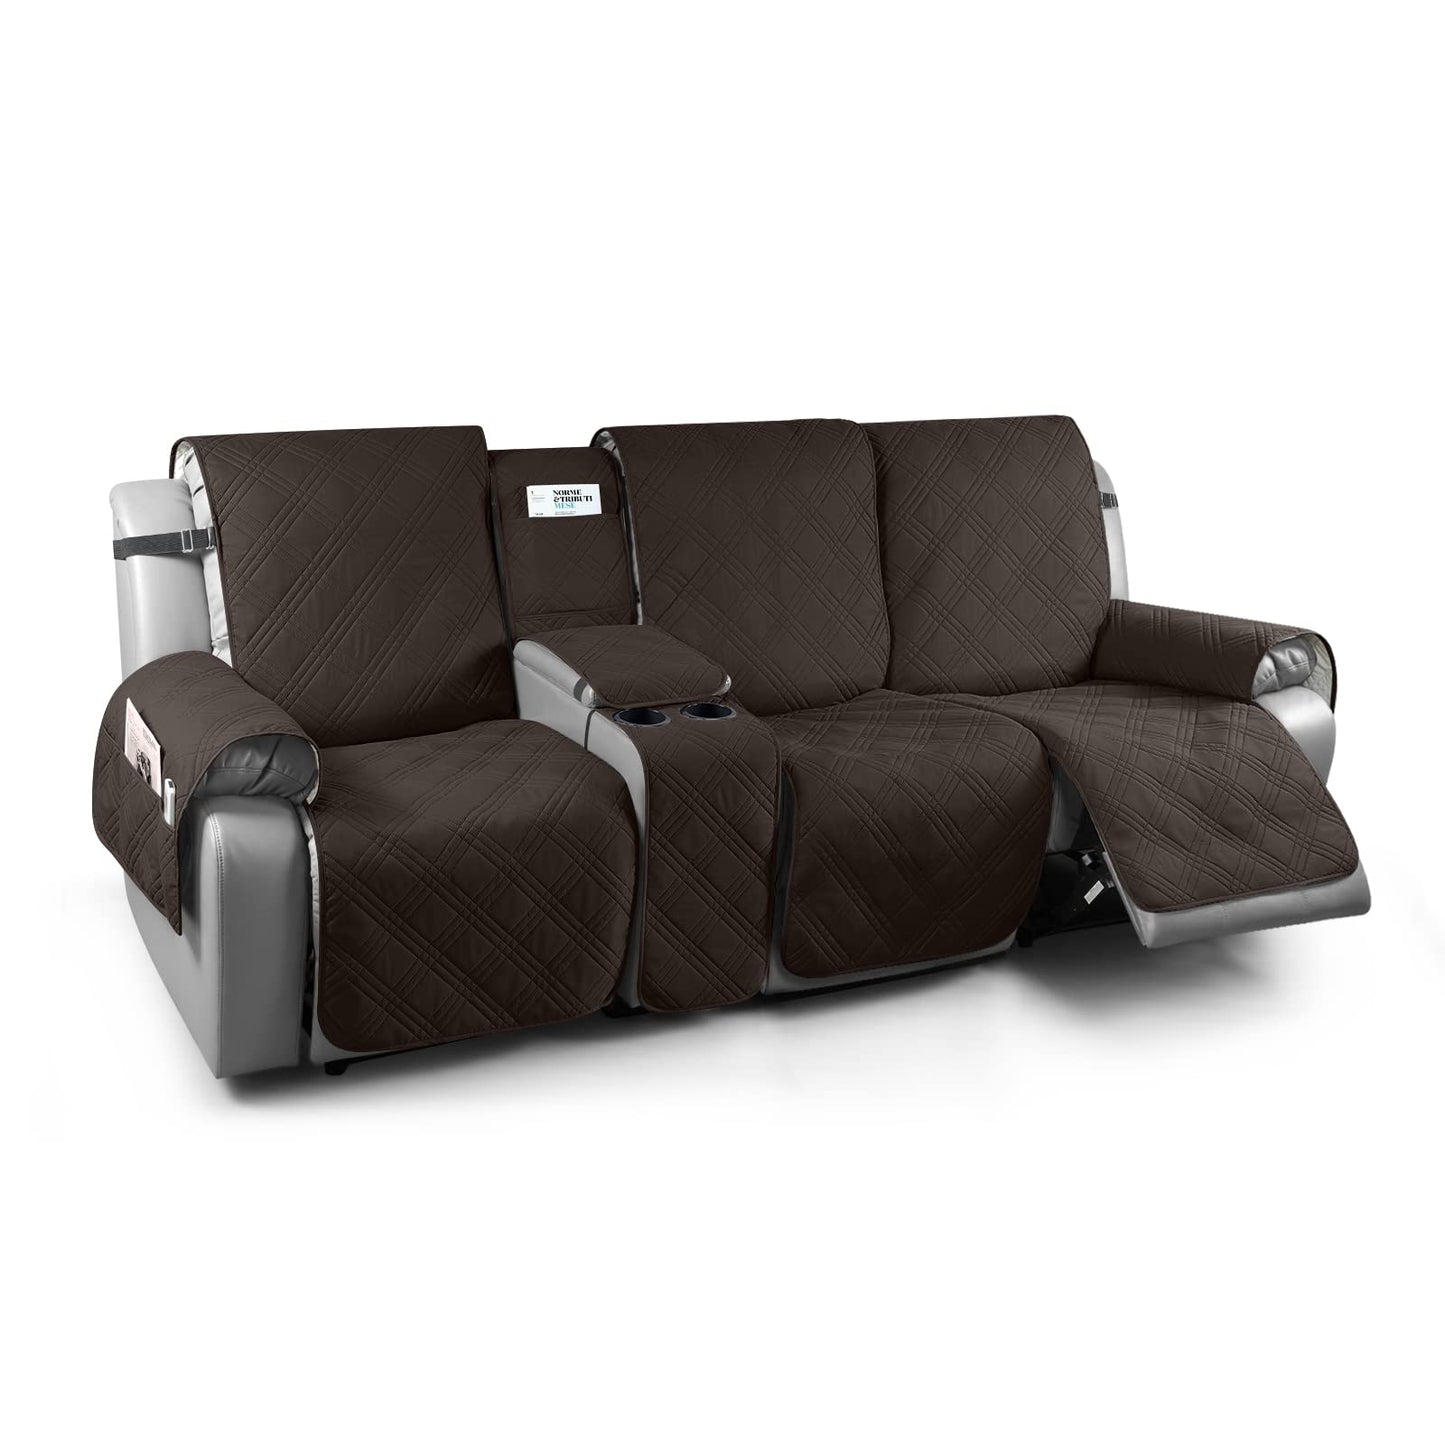 Loveseat Recliner Cover with Center Console (3 Seater) - TAOCOCO